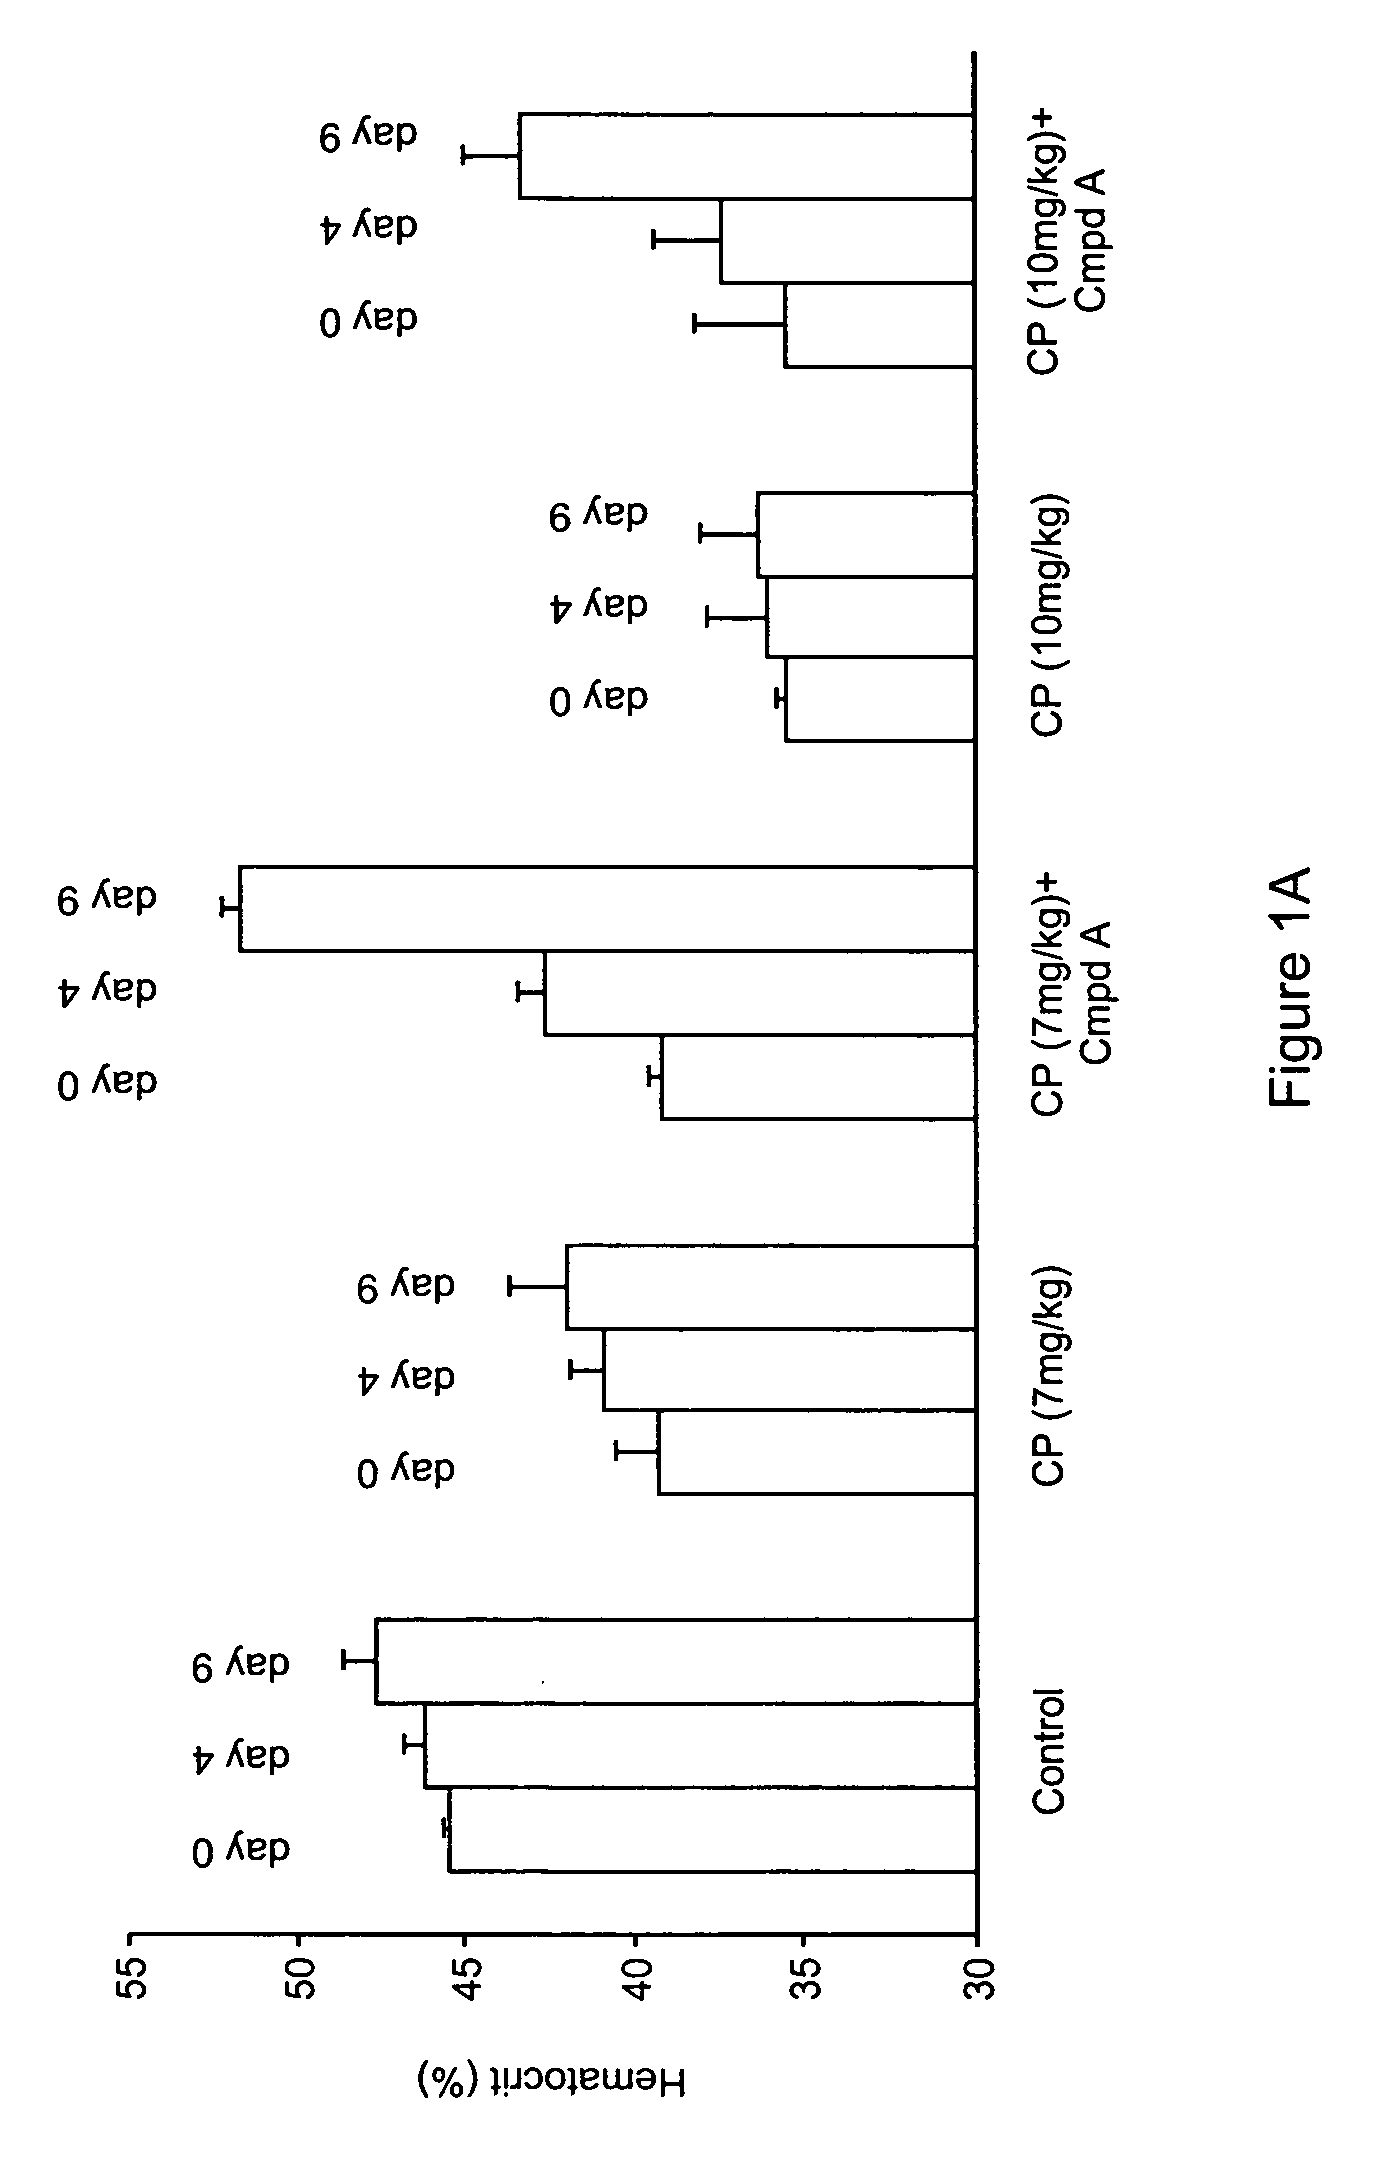 Compounds and methods for treatment of chemotherapy-induced anemia